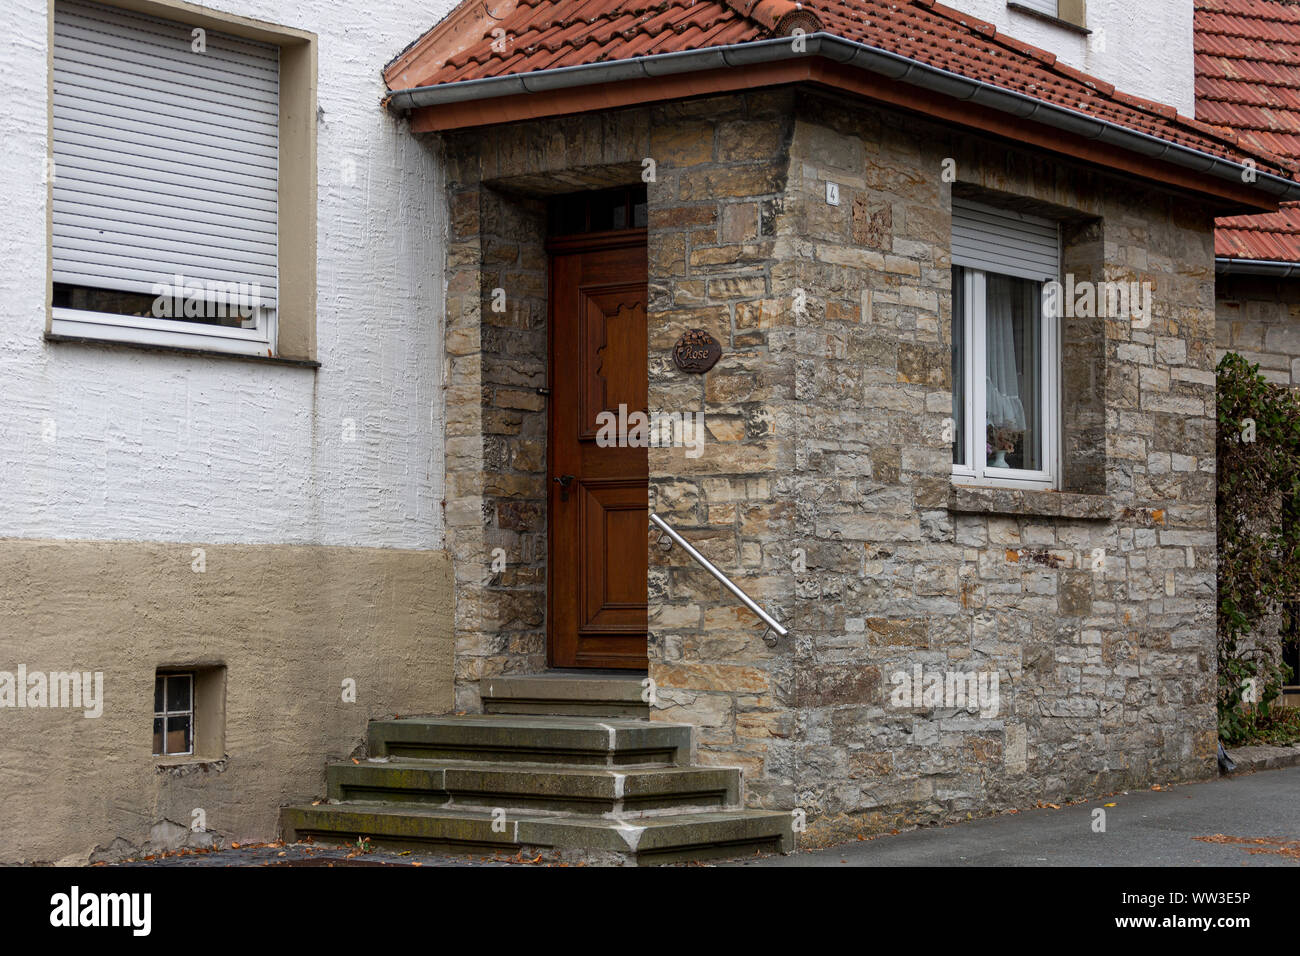 Architectural detail of a house near the Wewelsburg castle with brick construction Stock Photo